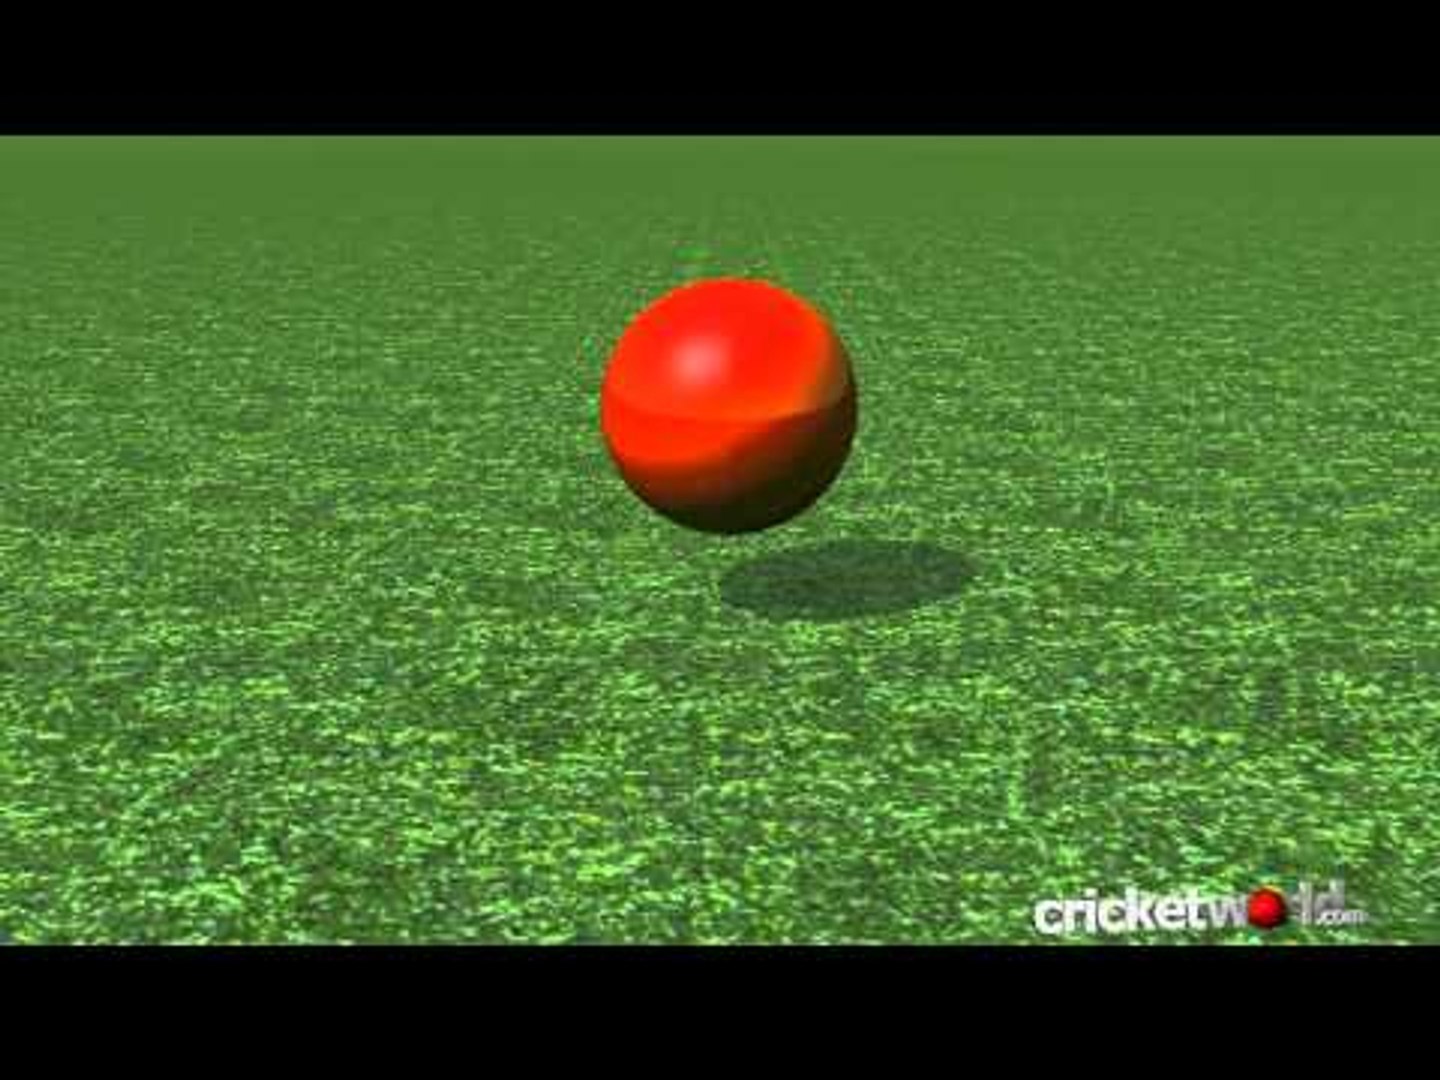 Cricket Video News - On This Day - 8th May - Bevan, Zoysa  - Cricket World TV